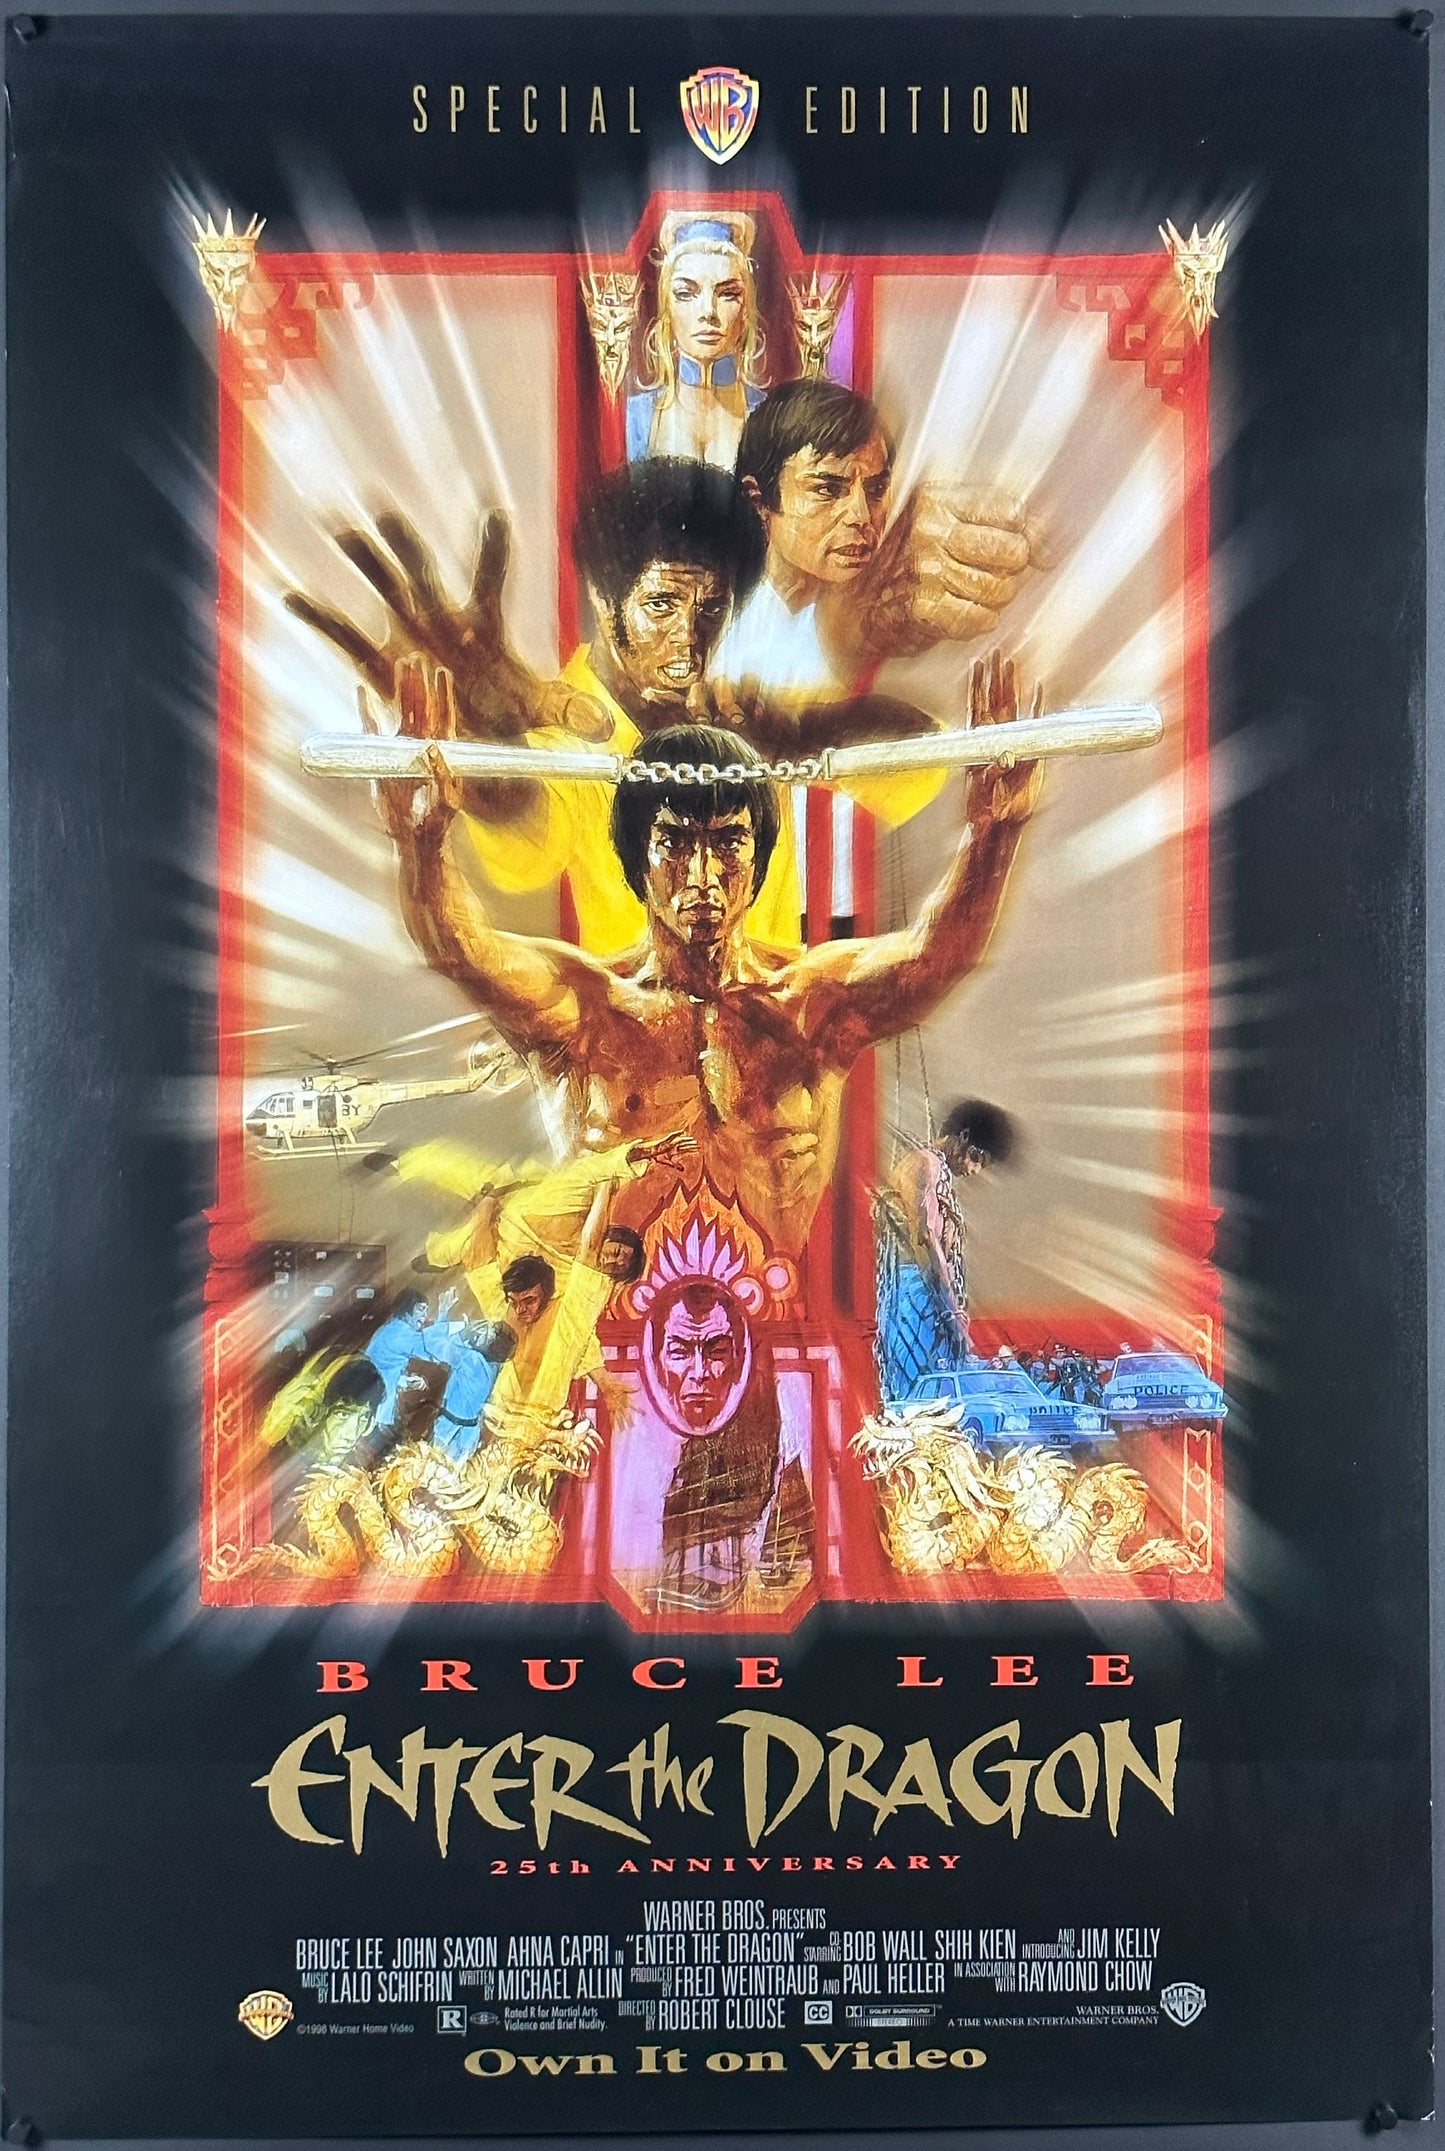 Enter The Dragon US One Sheet "Special Edition" Video Release (1973) - ORIGINAL RELEASE - posterpalace.com